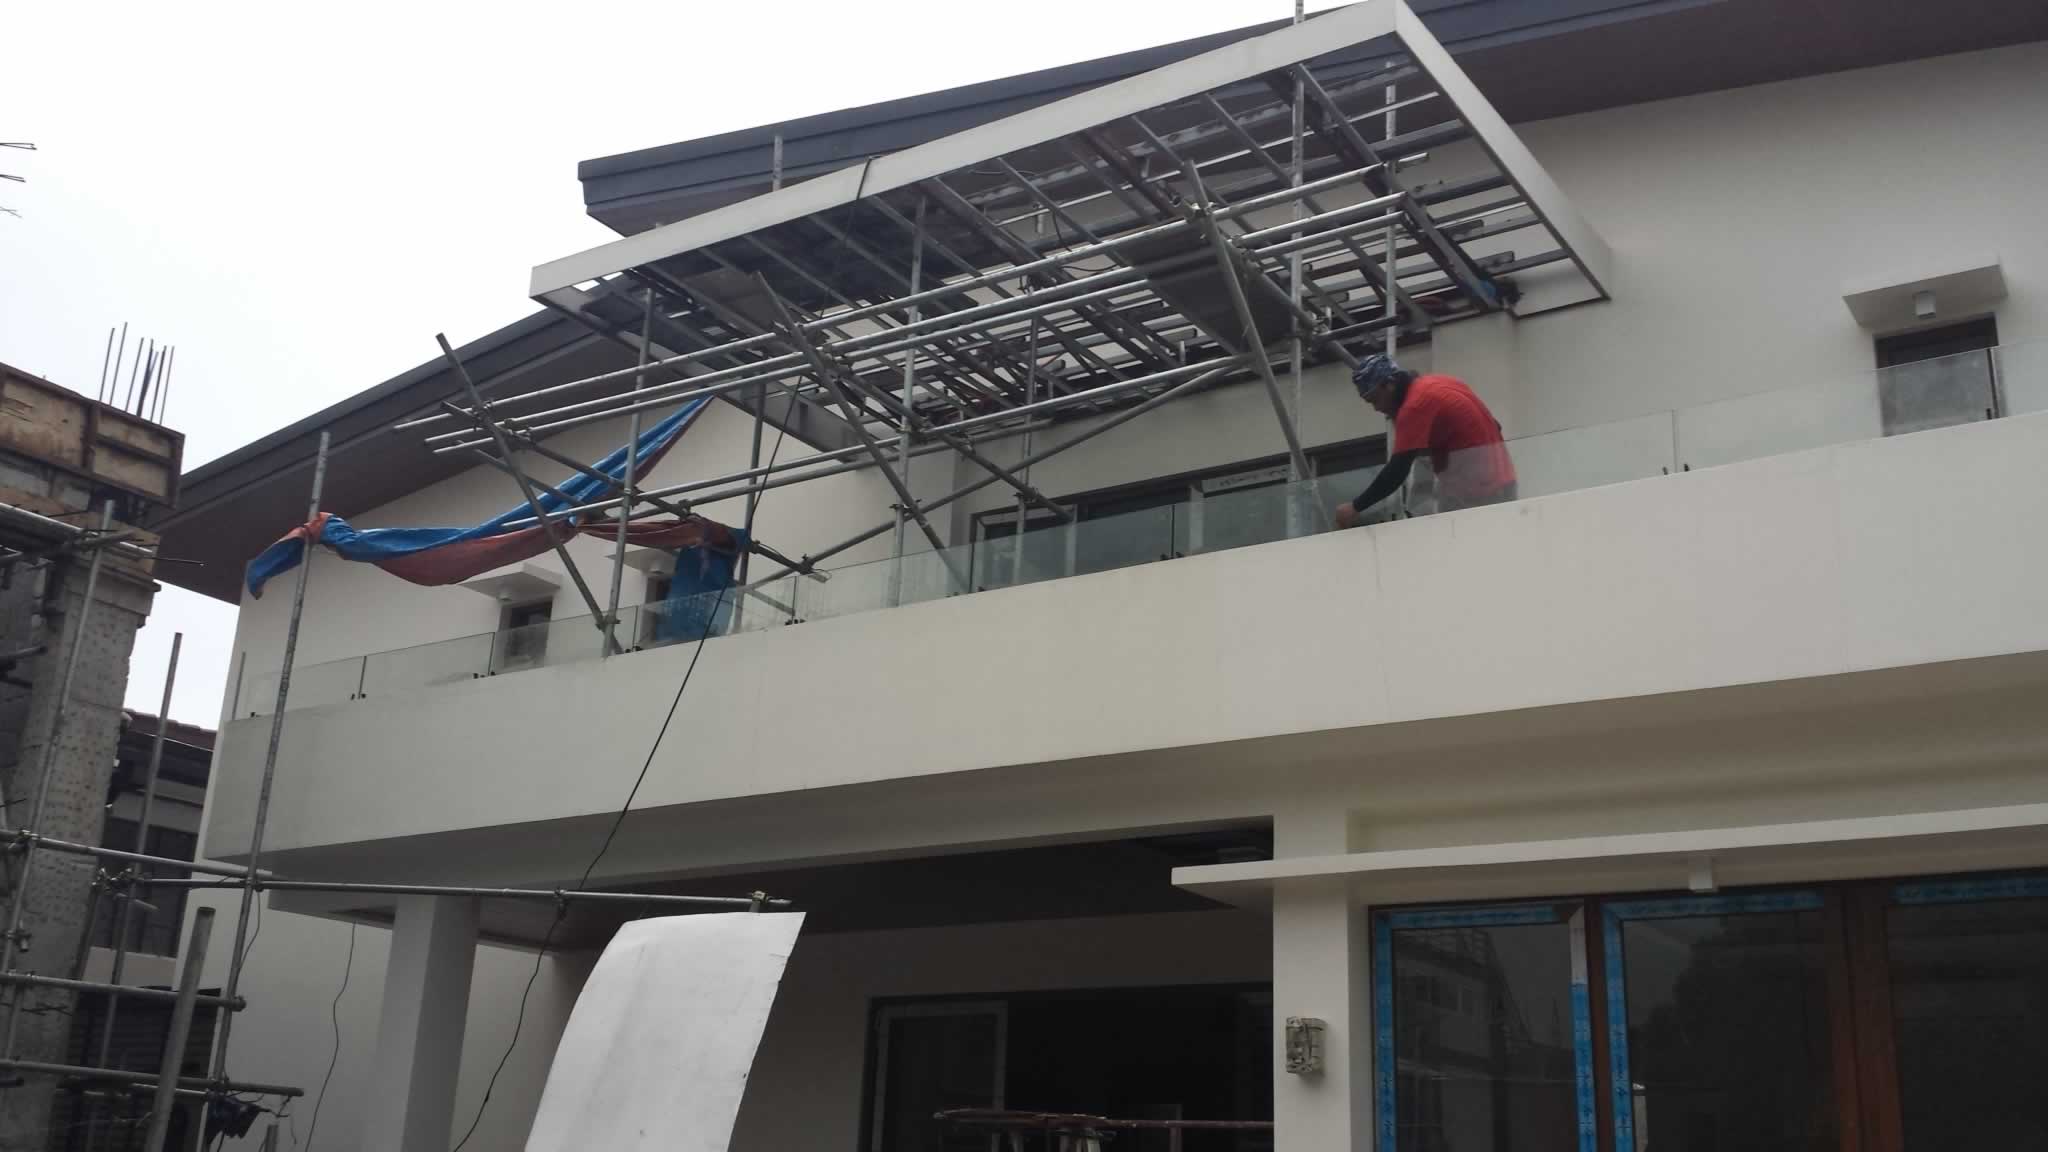 Glass Stair Railings Philippines in Metal Frame